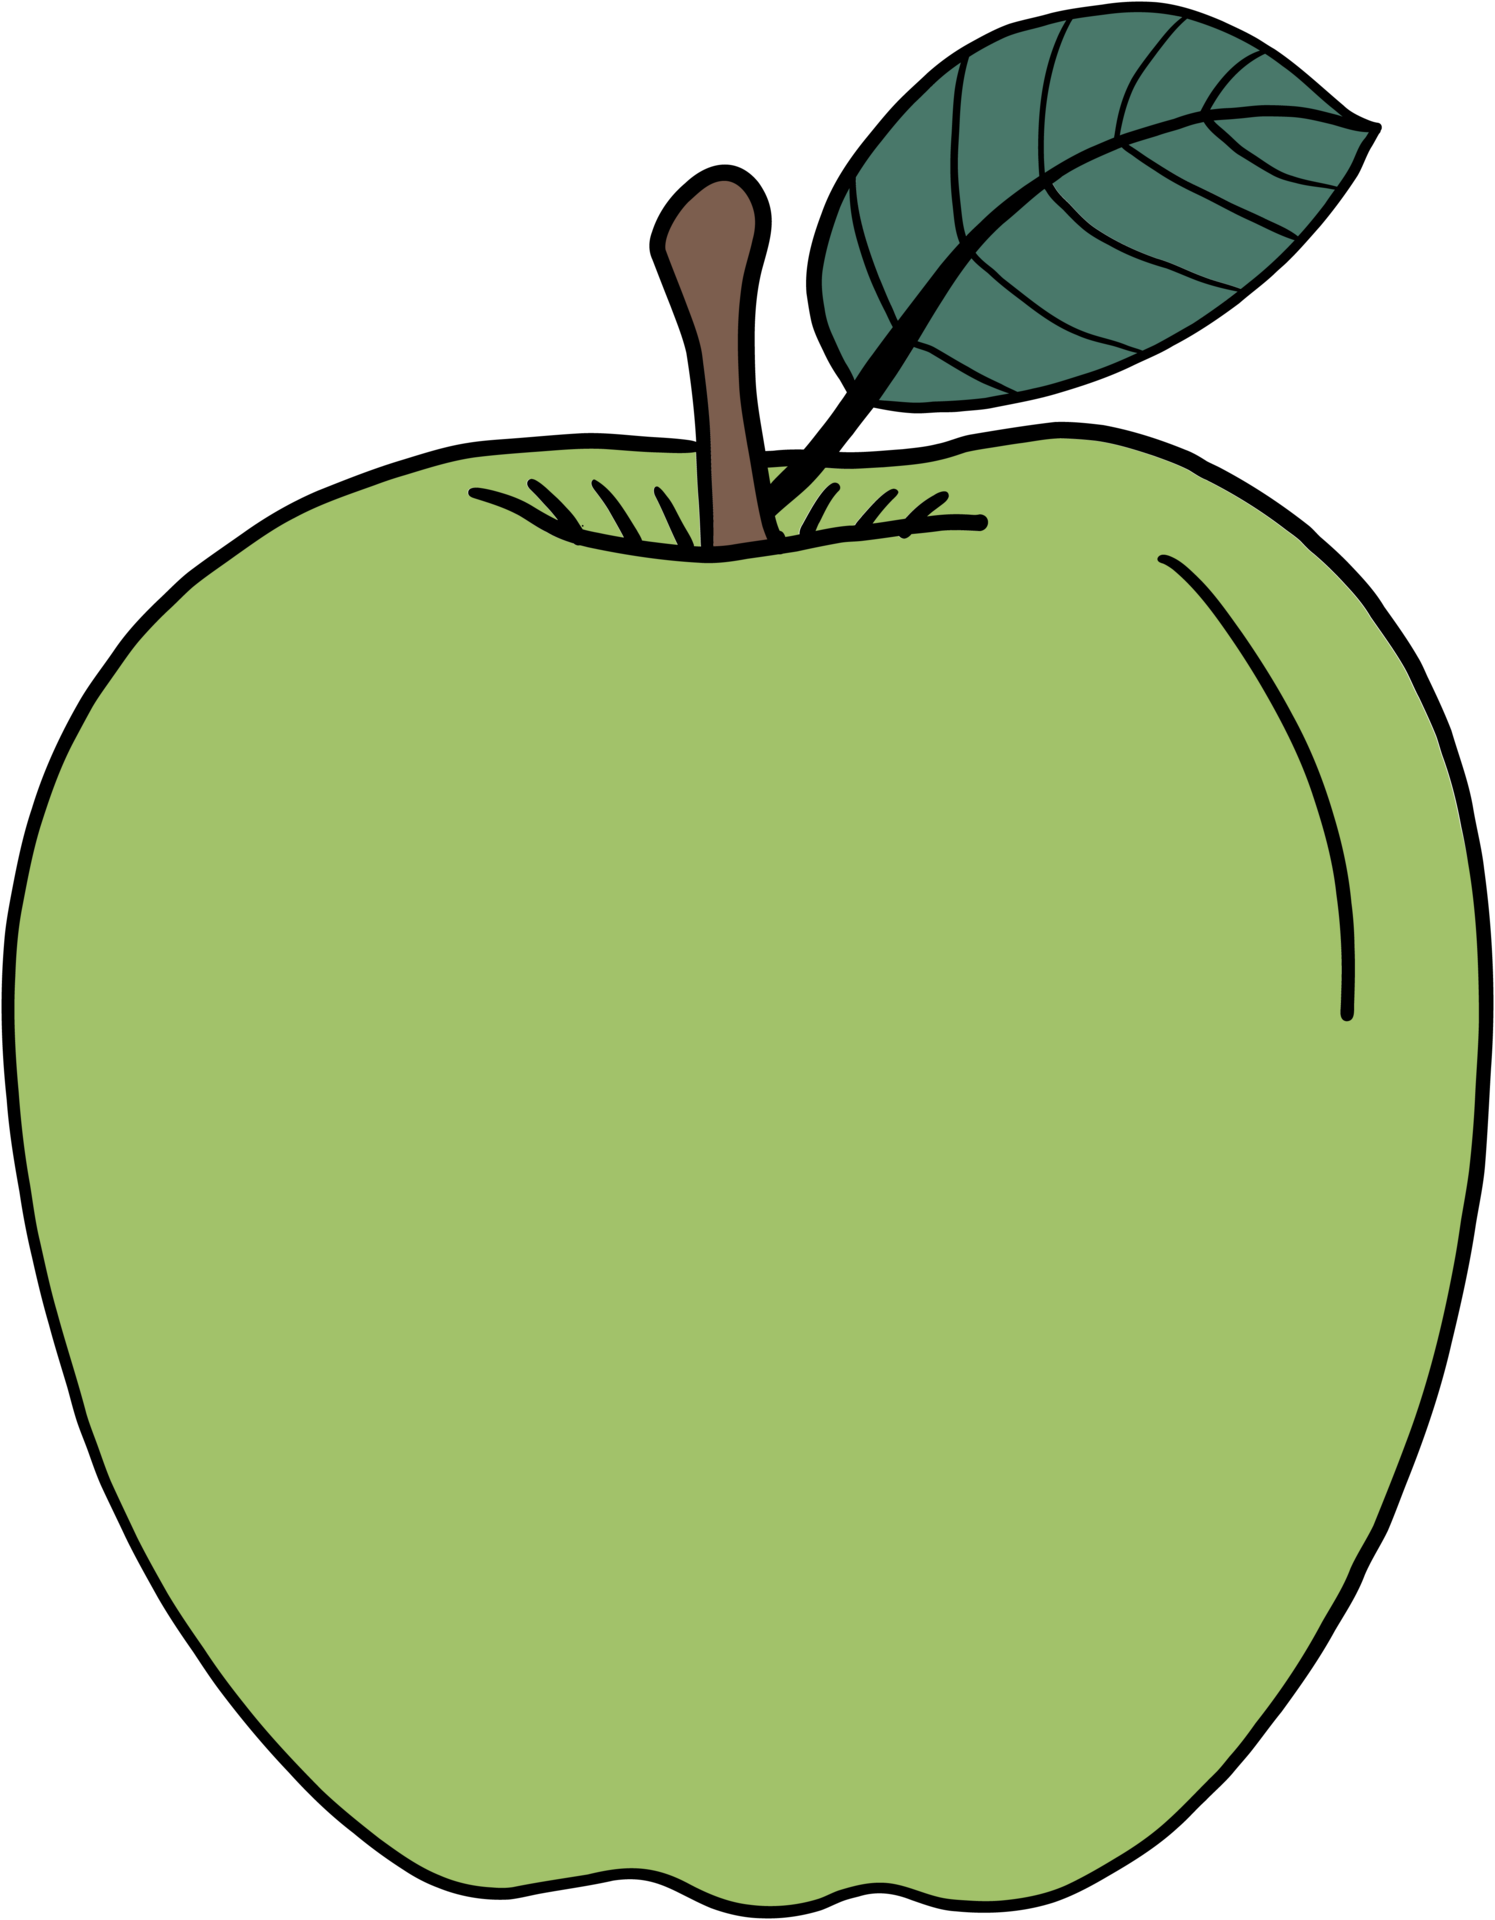 Sketch silhouette image apple fruit with stem and leaves vector  illustration. | CanStock